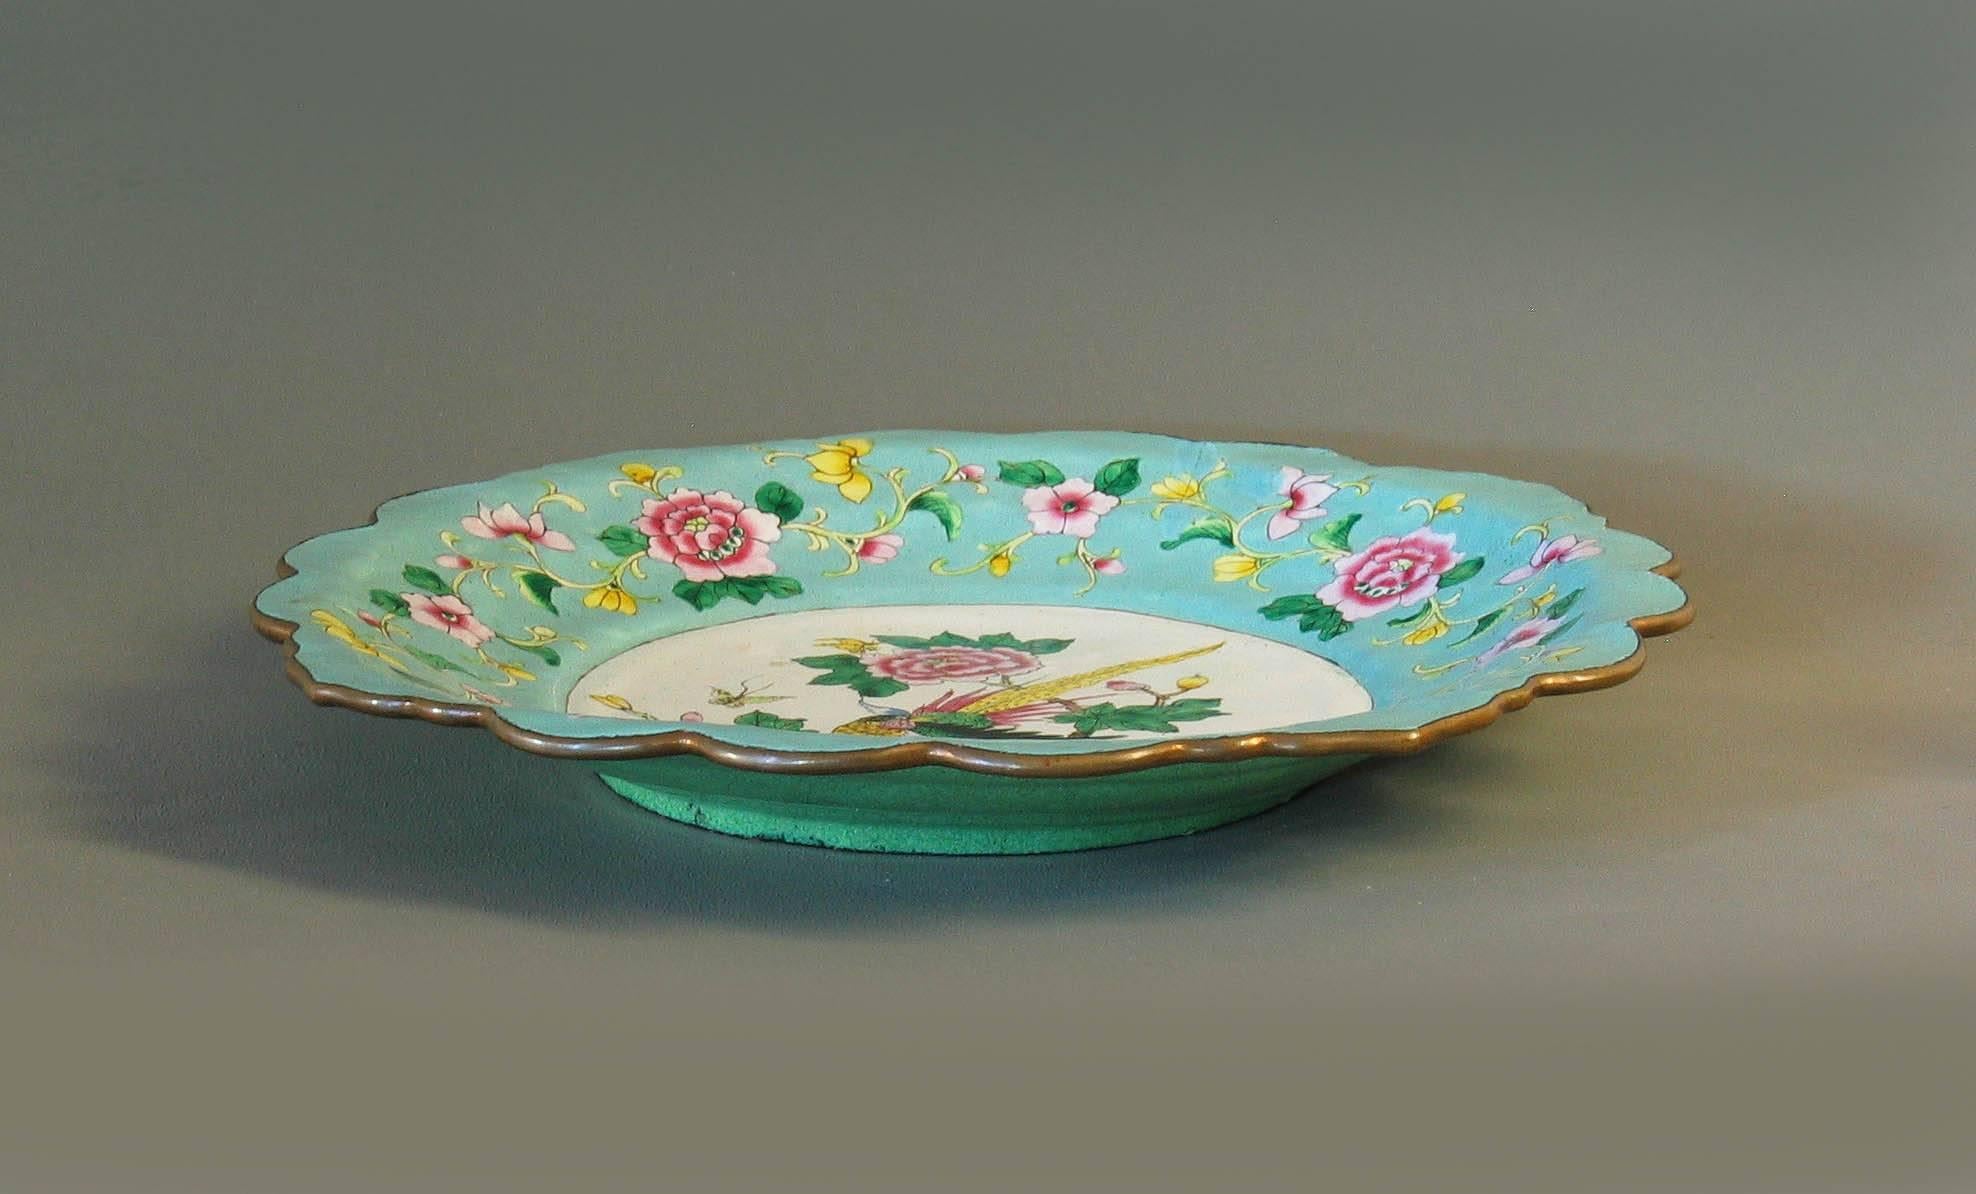 Chinese Canton Enamel Bracket-Lobed Dish Guangxu Period, 1875-1908 For Sale